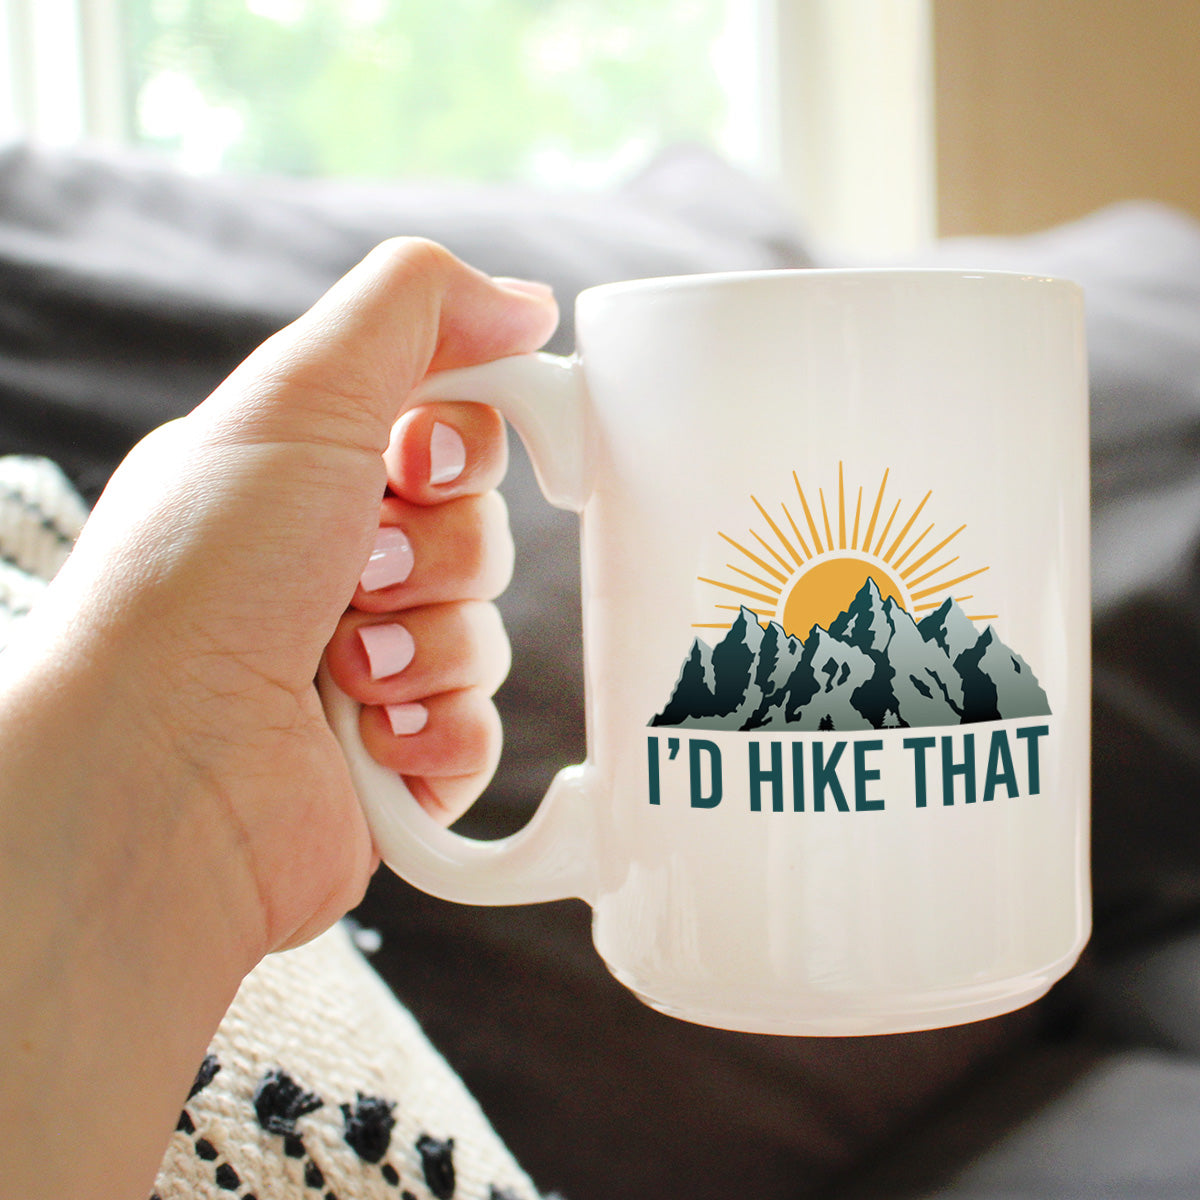 I&#39;d Hike That Coffee Mug - Fun Hiking Themed Decor and Gifts for Hikers